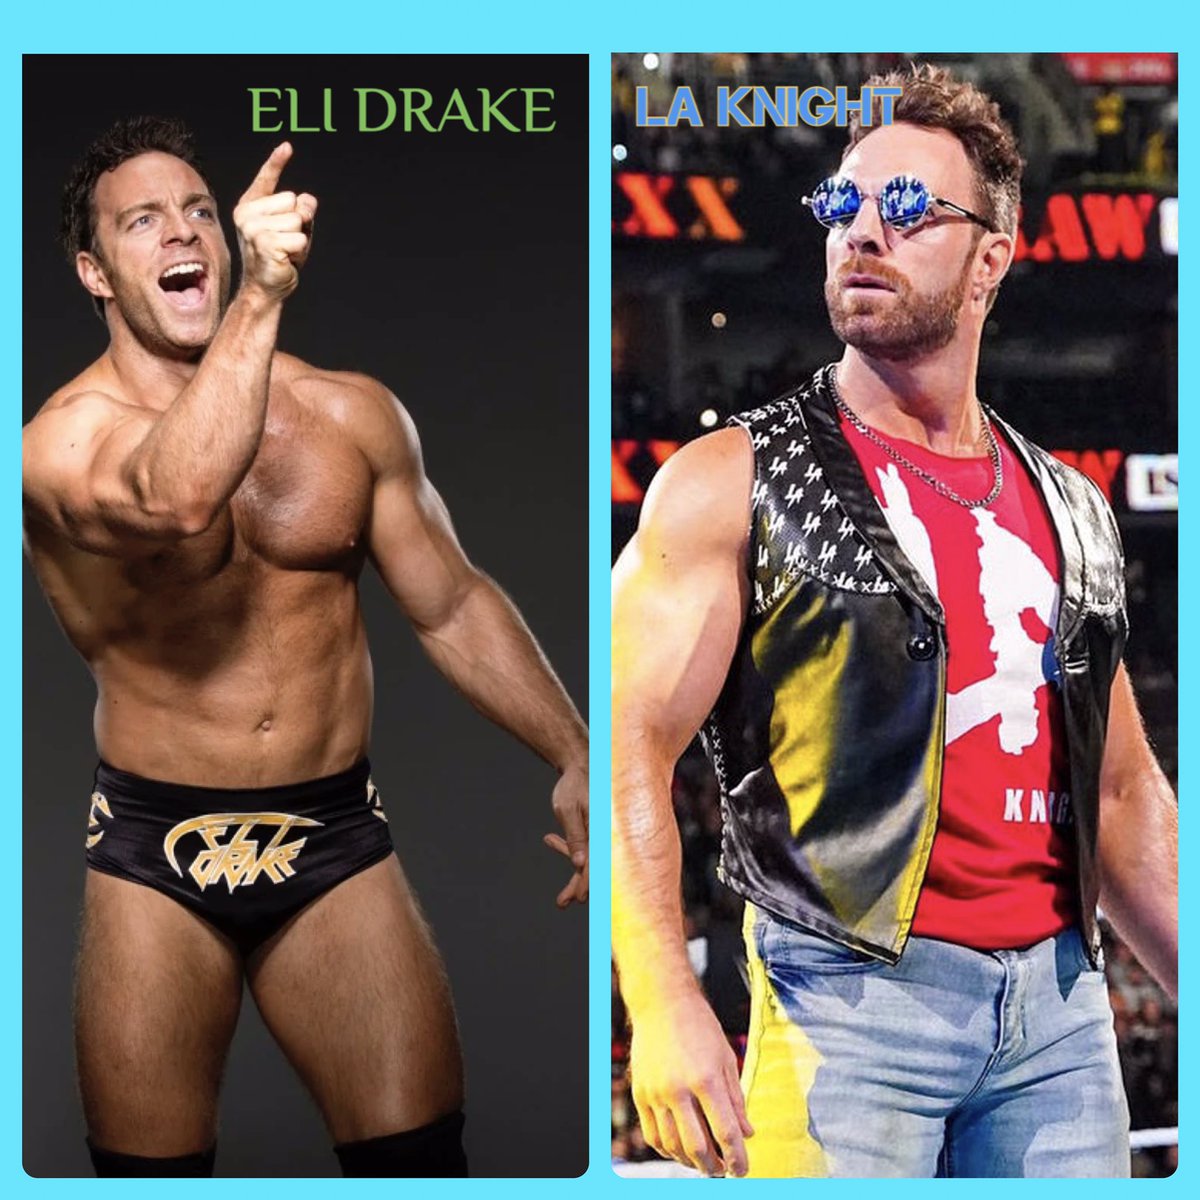 #LetMeTalkToYa. From his time in #AEW as #EliDrake to now in #WWE as #LAKnight, LA Knight is the face of Wrestling and Sports Entertainment. LA has such tenacity and skills as a wrestler and a unique, versatile mic and promo ability. LA's charisma is GOLD. @RealLAKnight #YEAH 😘!